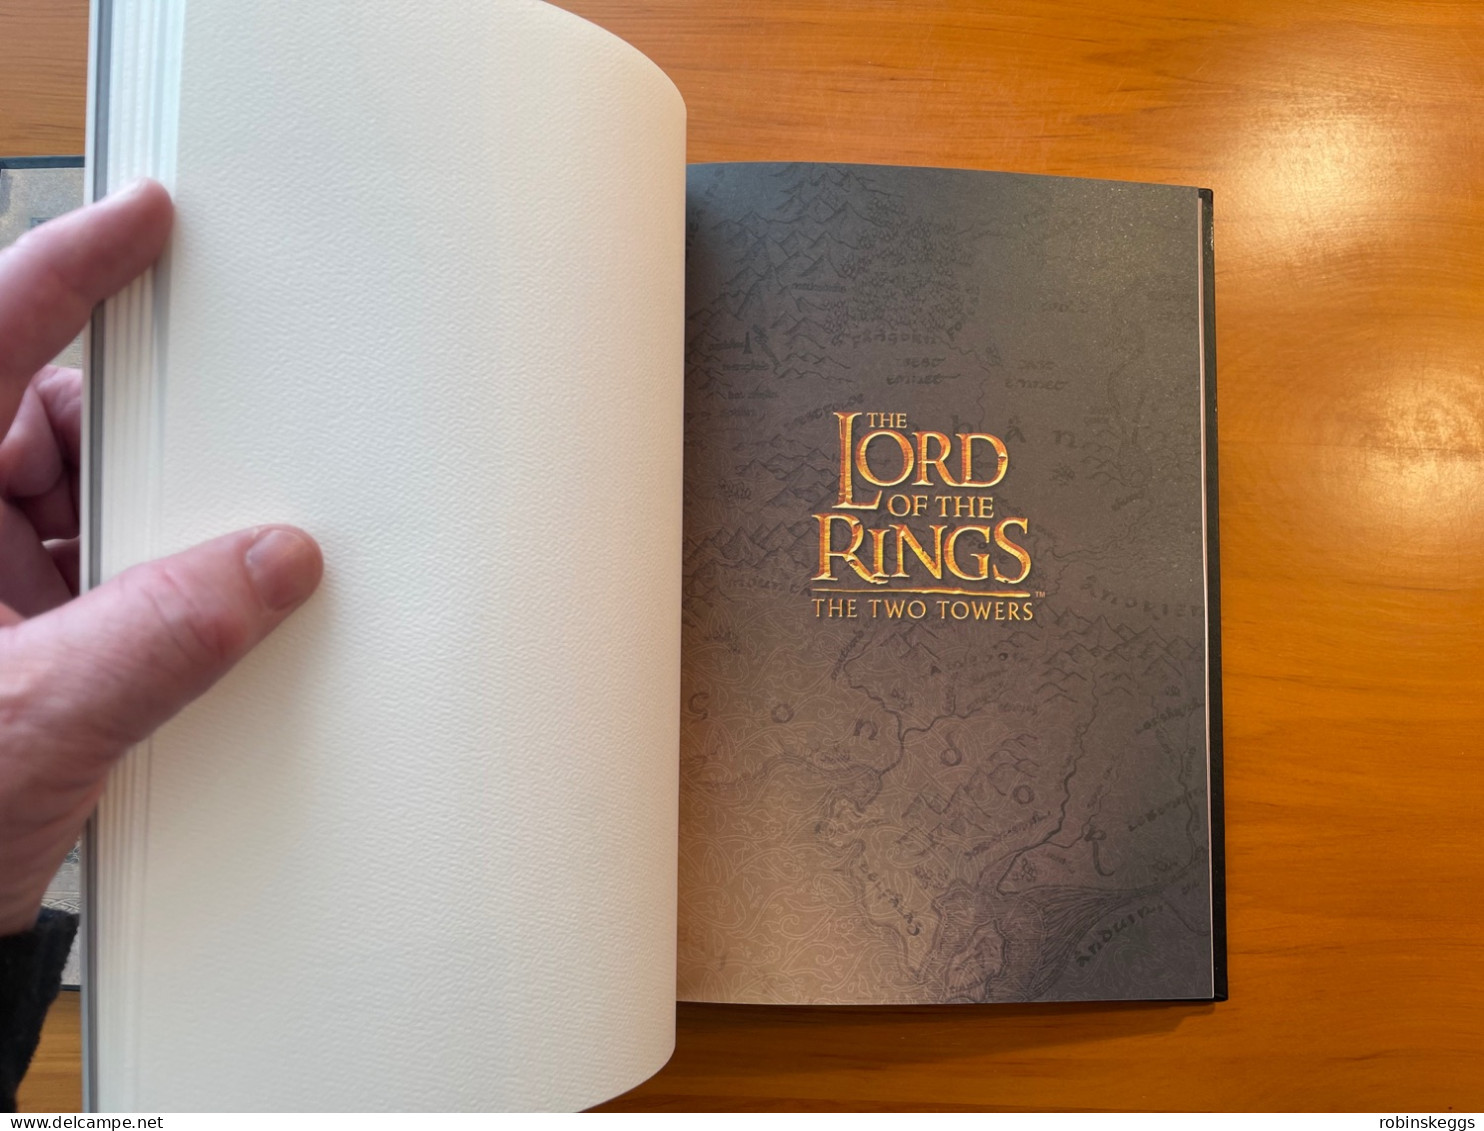 NEW ZEALAND The Lord of the Rings Trilogy Collection